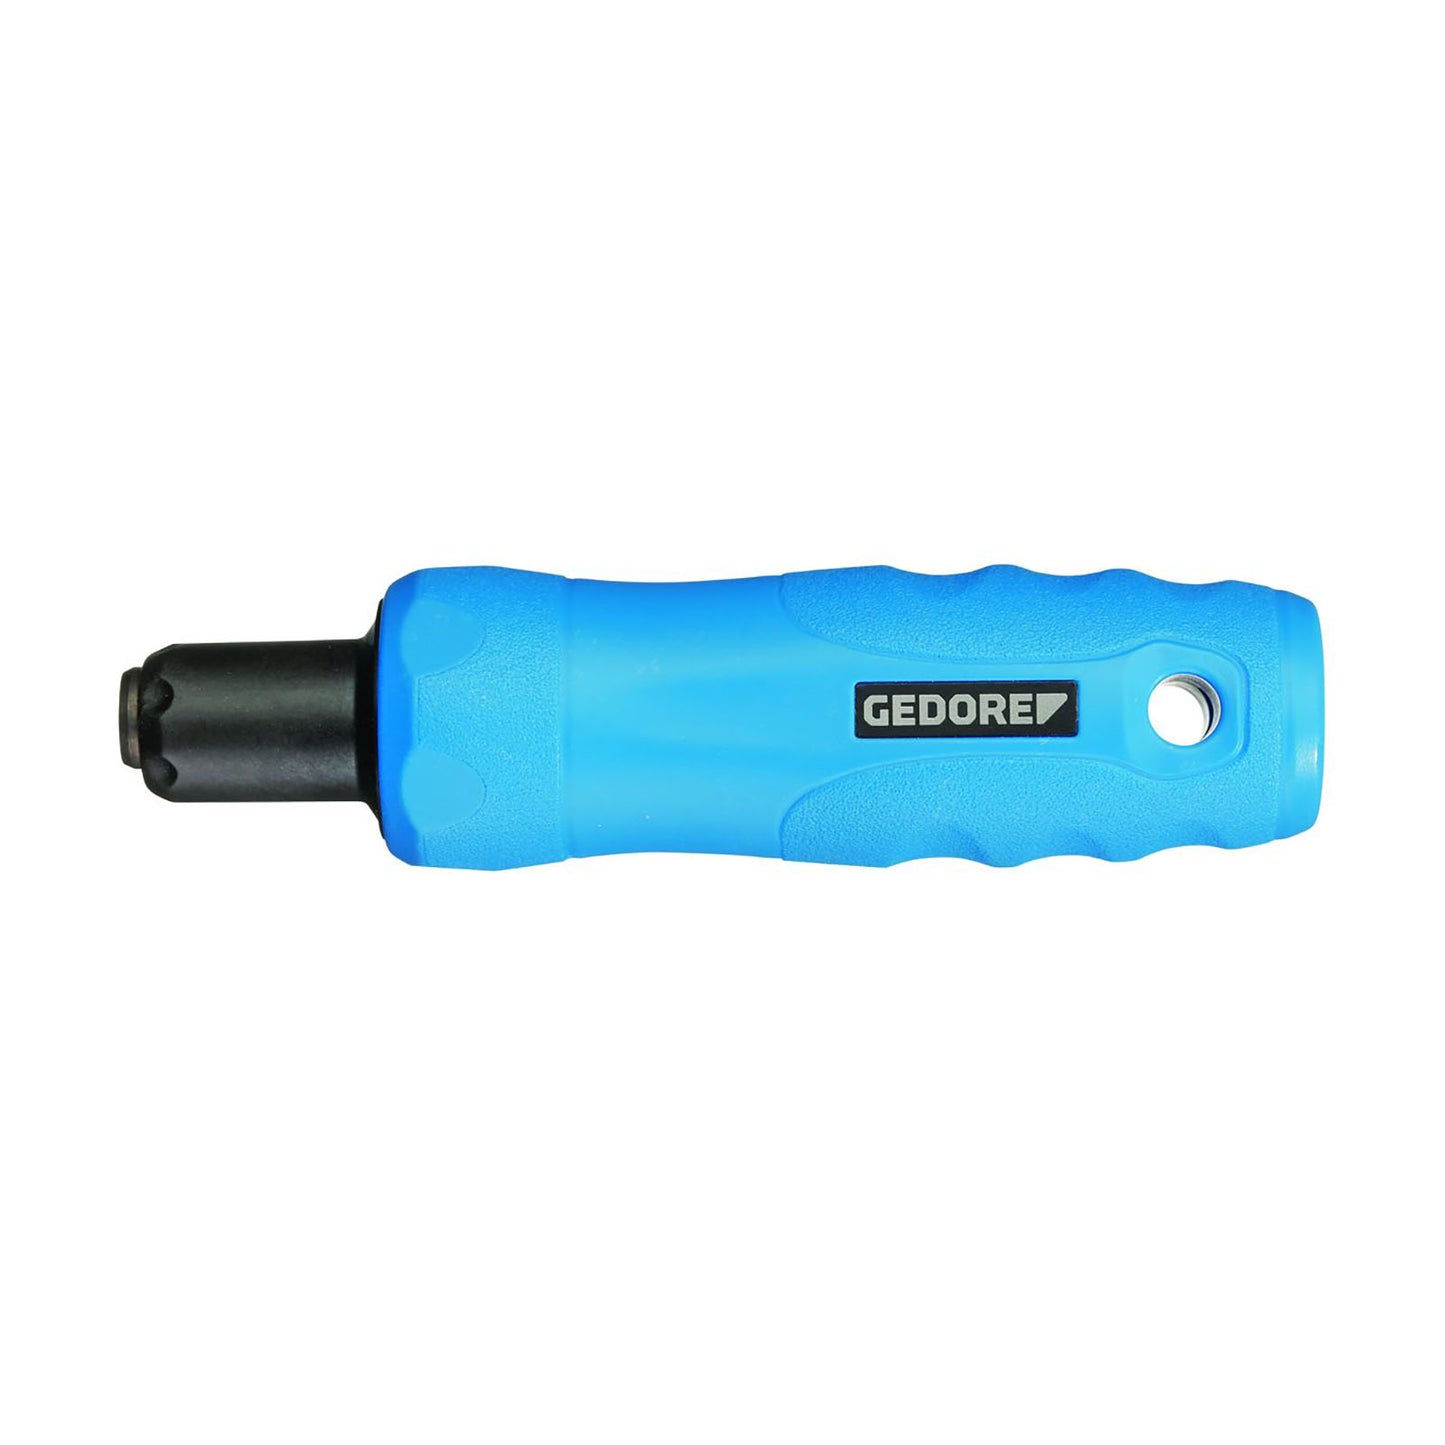 GEDORE PRIME 150 FH - PGNS Screwdriver 0.2-1.5 Nm (2927721)